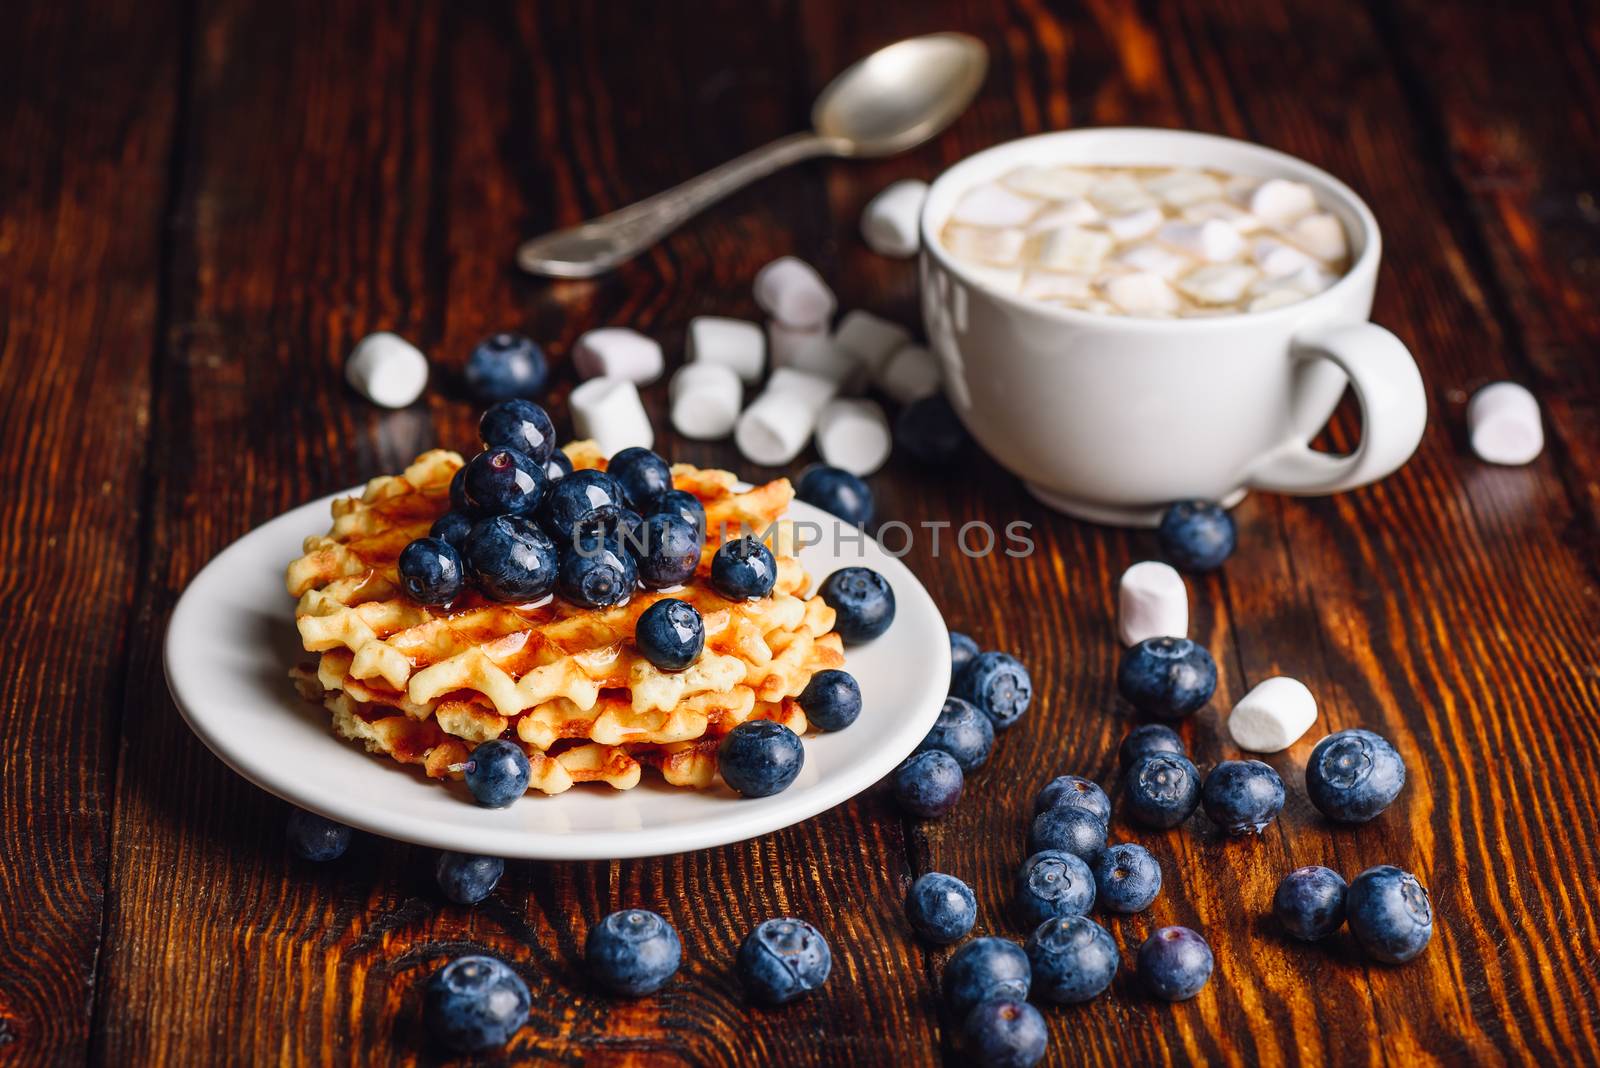 Waffles with Blueberry and Cup of Hot Chocolate. by Seva_blsv